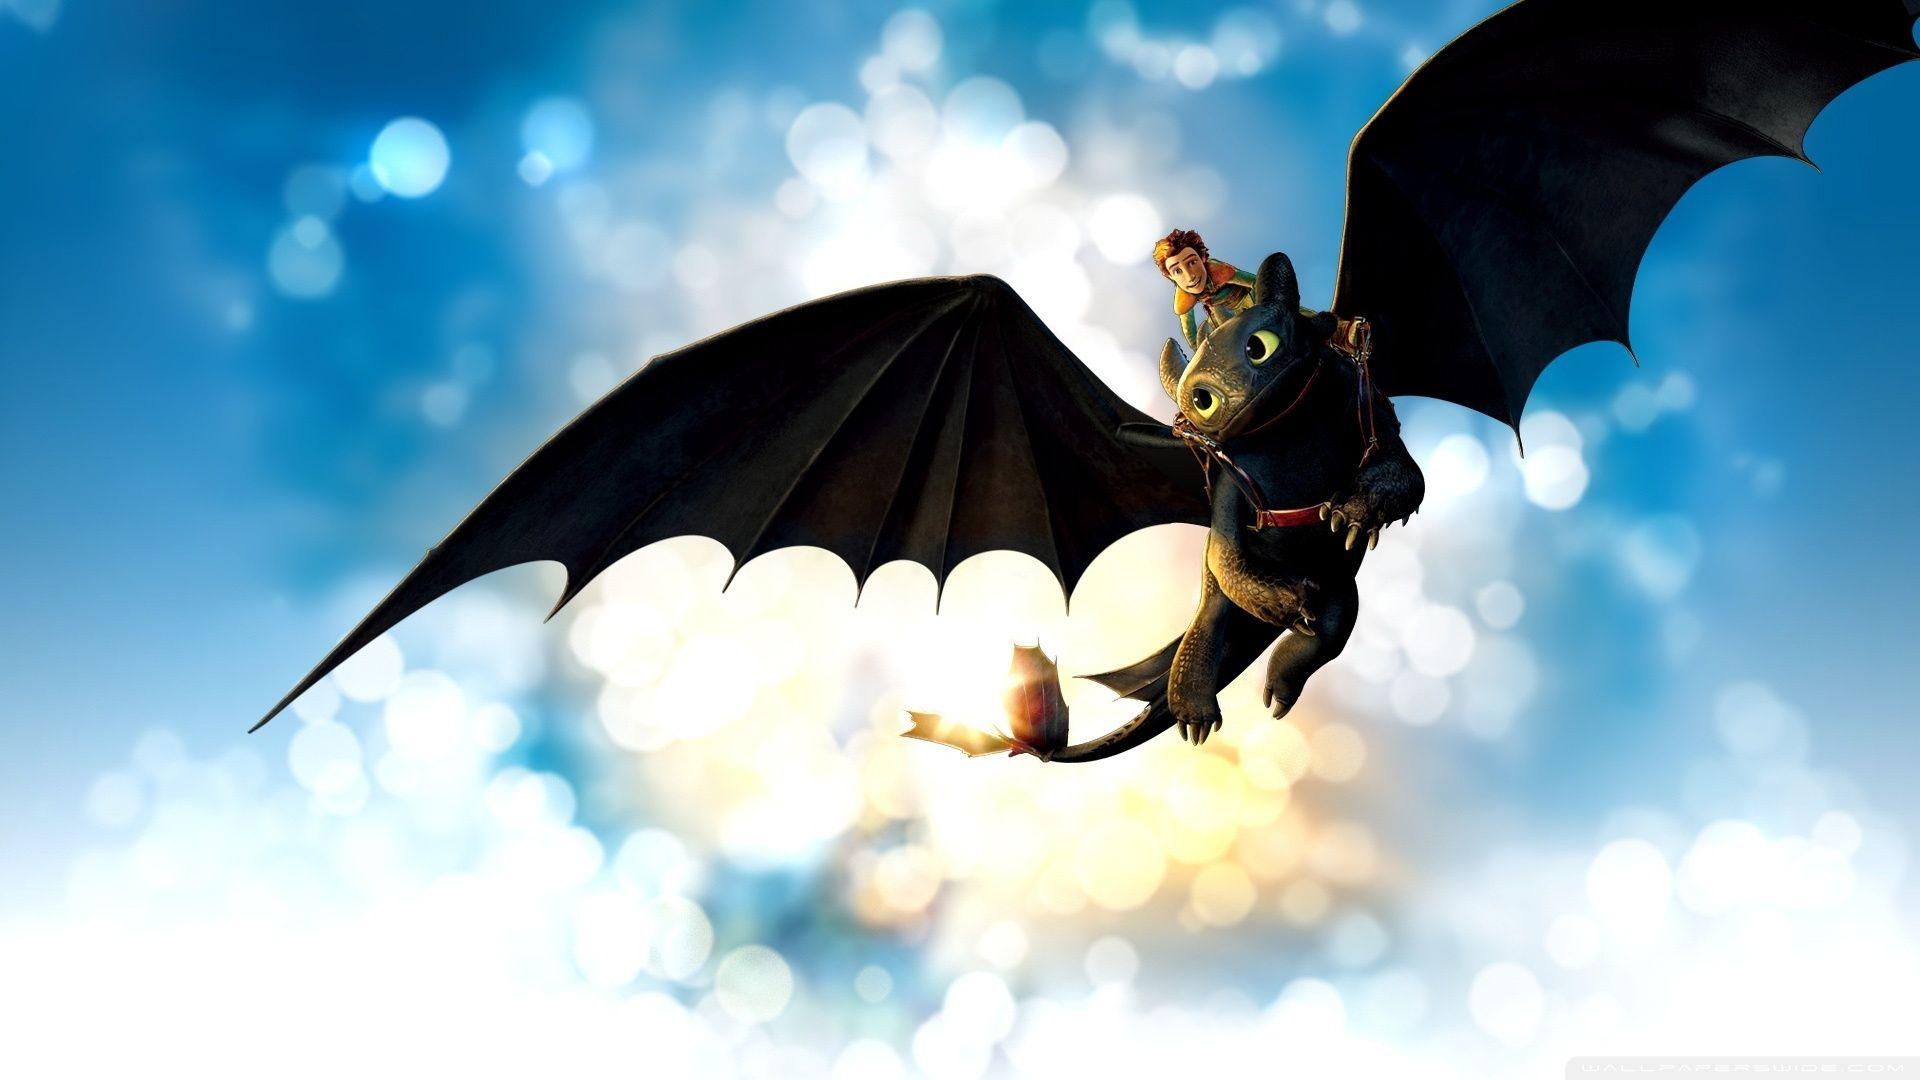 How To Train Your Dragon Wallpaper Free How To Train Your Dragon background - How to Train Your Dragon